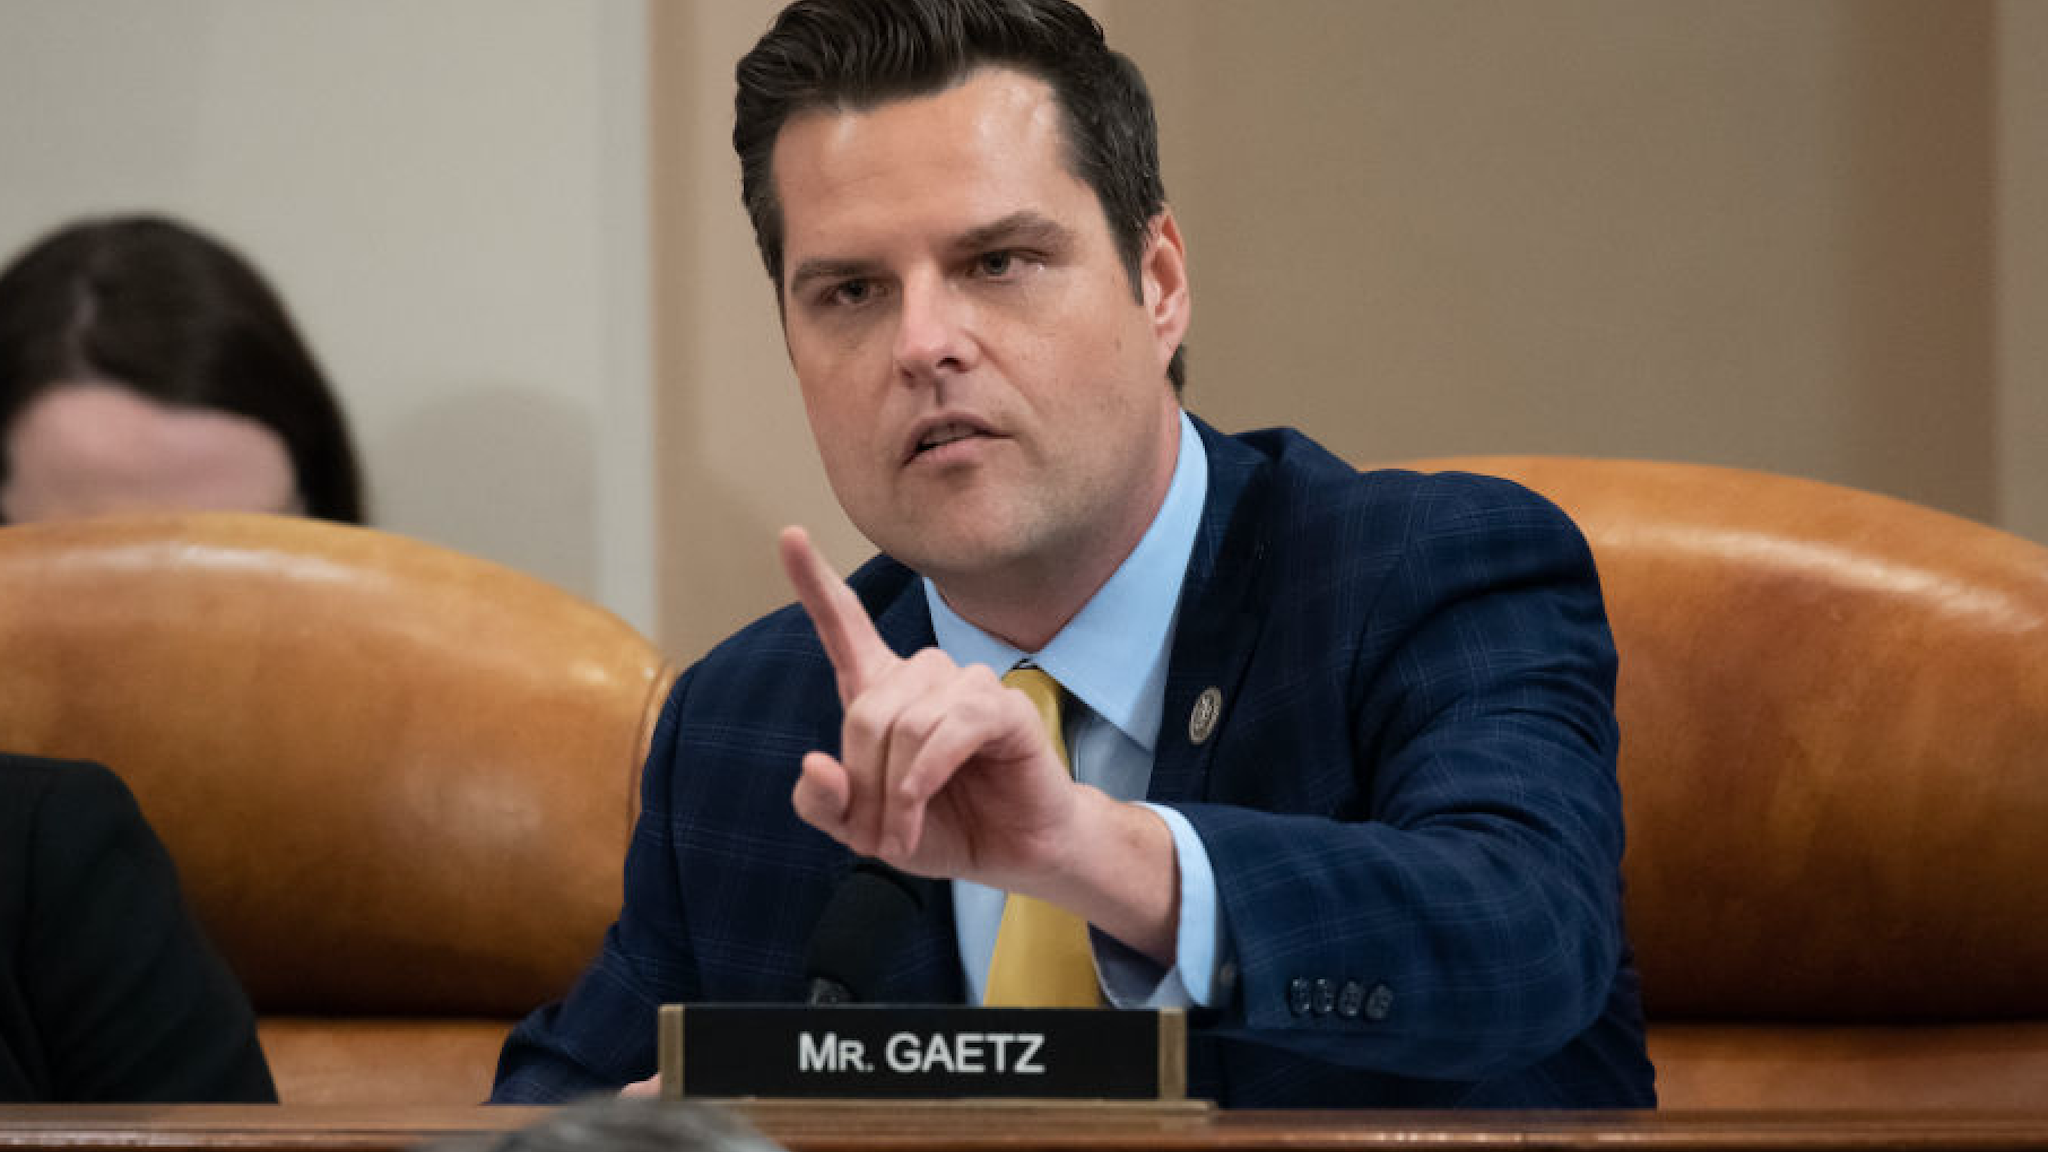 Rep. Matt Gaetz (R-FL) speaks during testimony by constitutional scholars before the House Judiciary Committee in the Longworth House Office Building on Capitol Hill December 4, 2019 in Washington, DC.